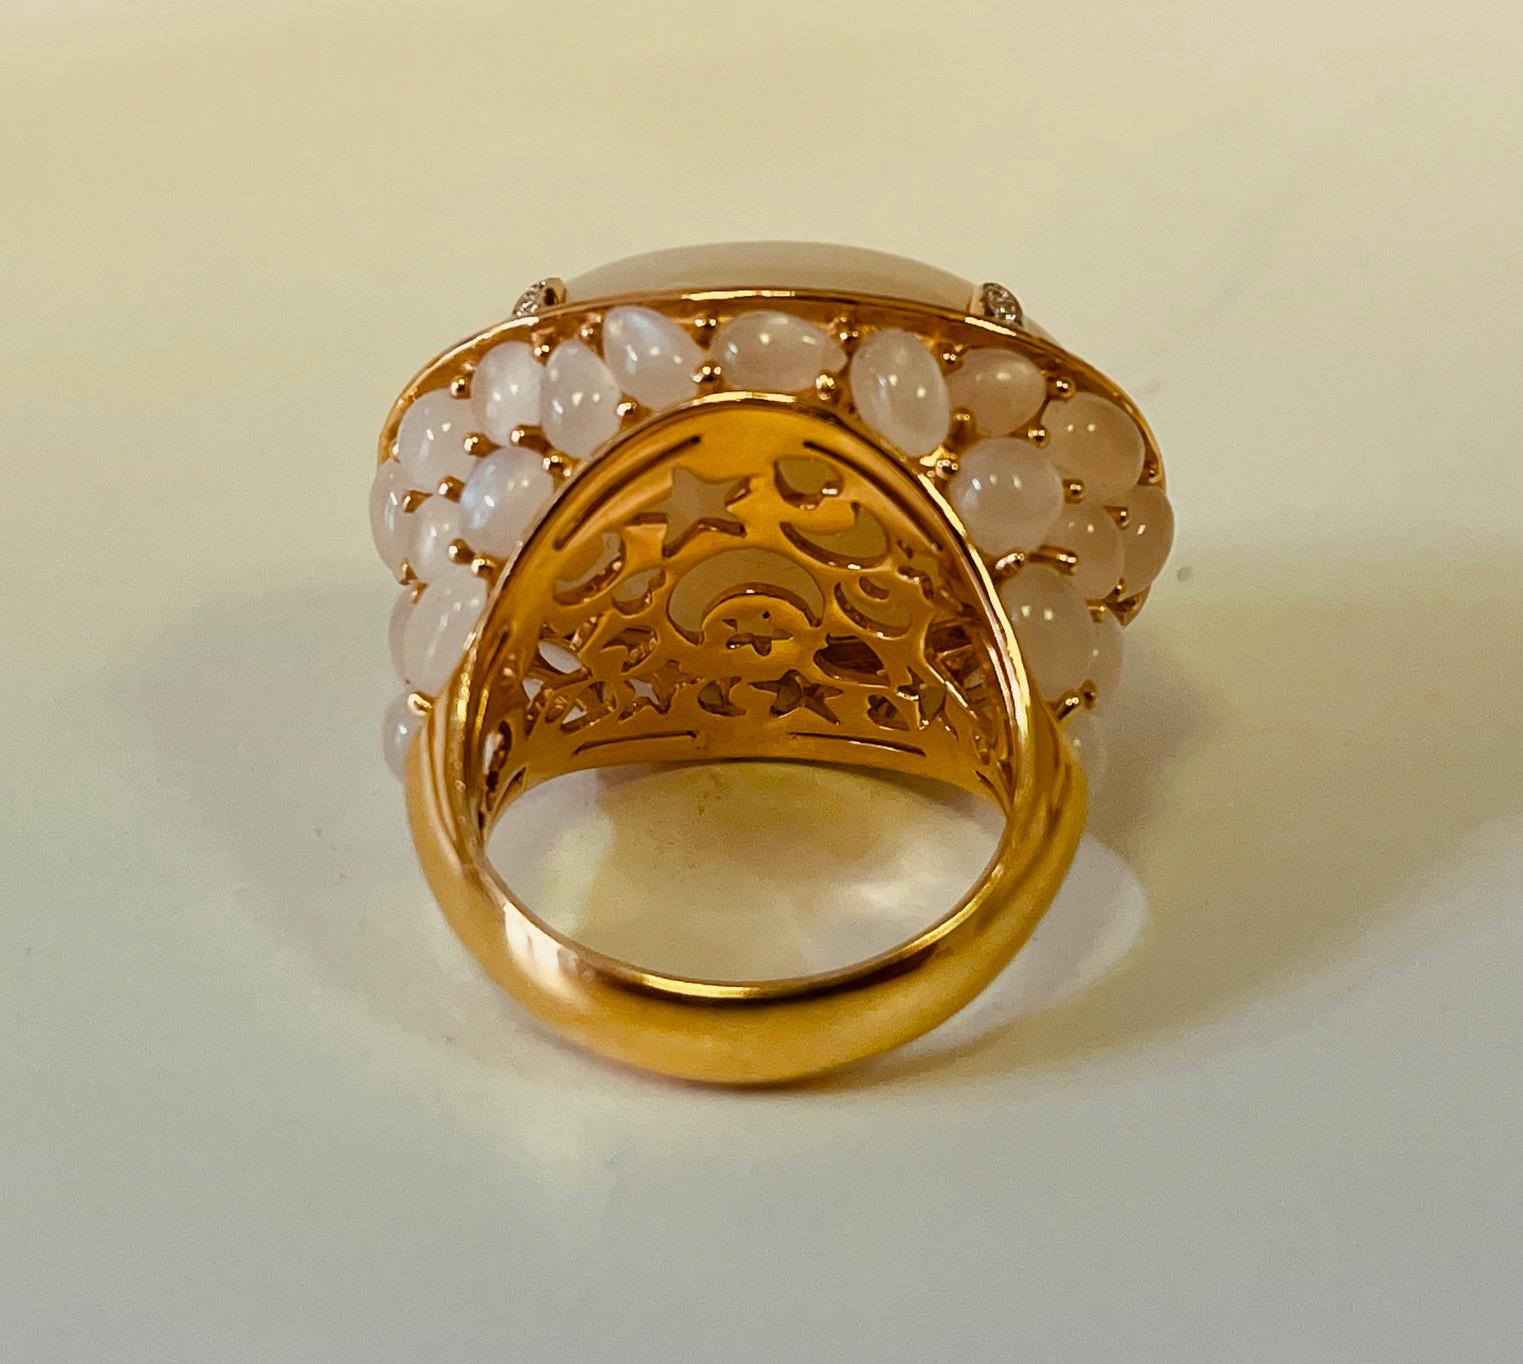 18ct Yellow Gold Ring Set With A Moonstone Cabochon Surrounded By 80ct Diamonds For Sale 3